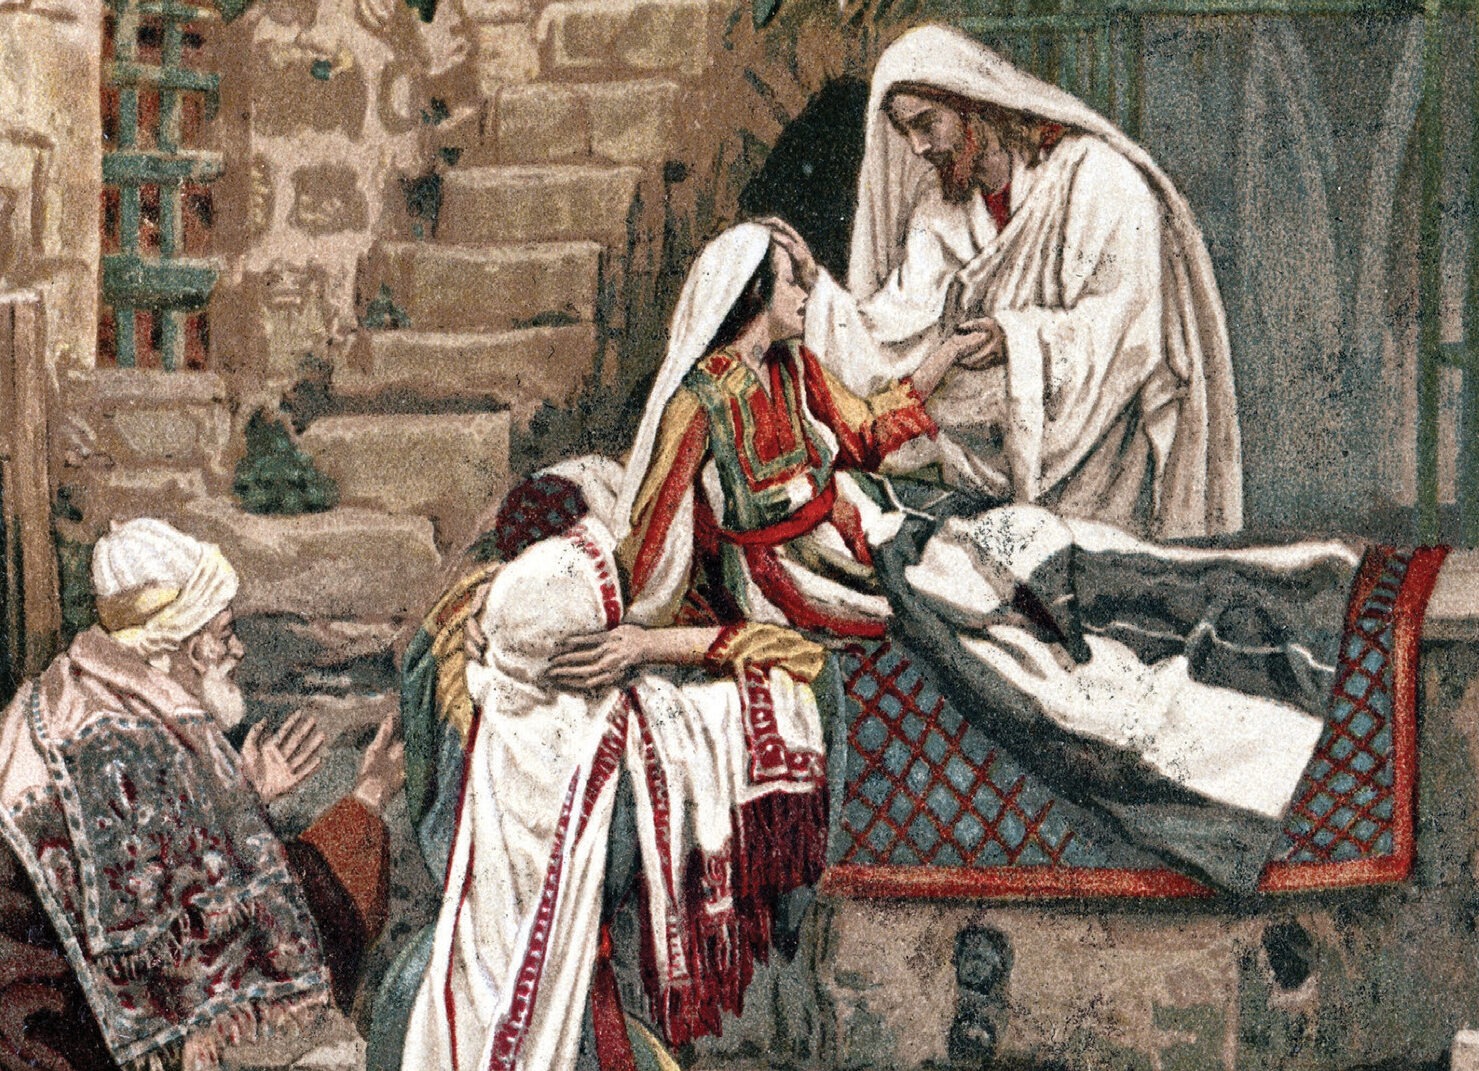 sacrament of anointing of the sick